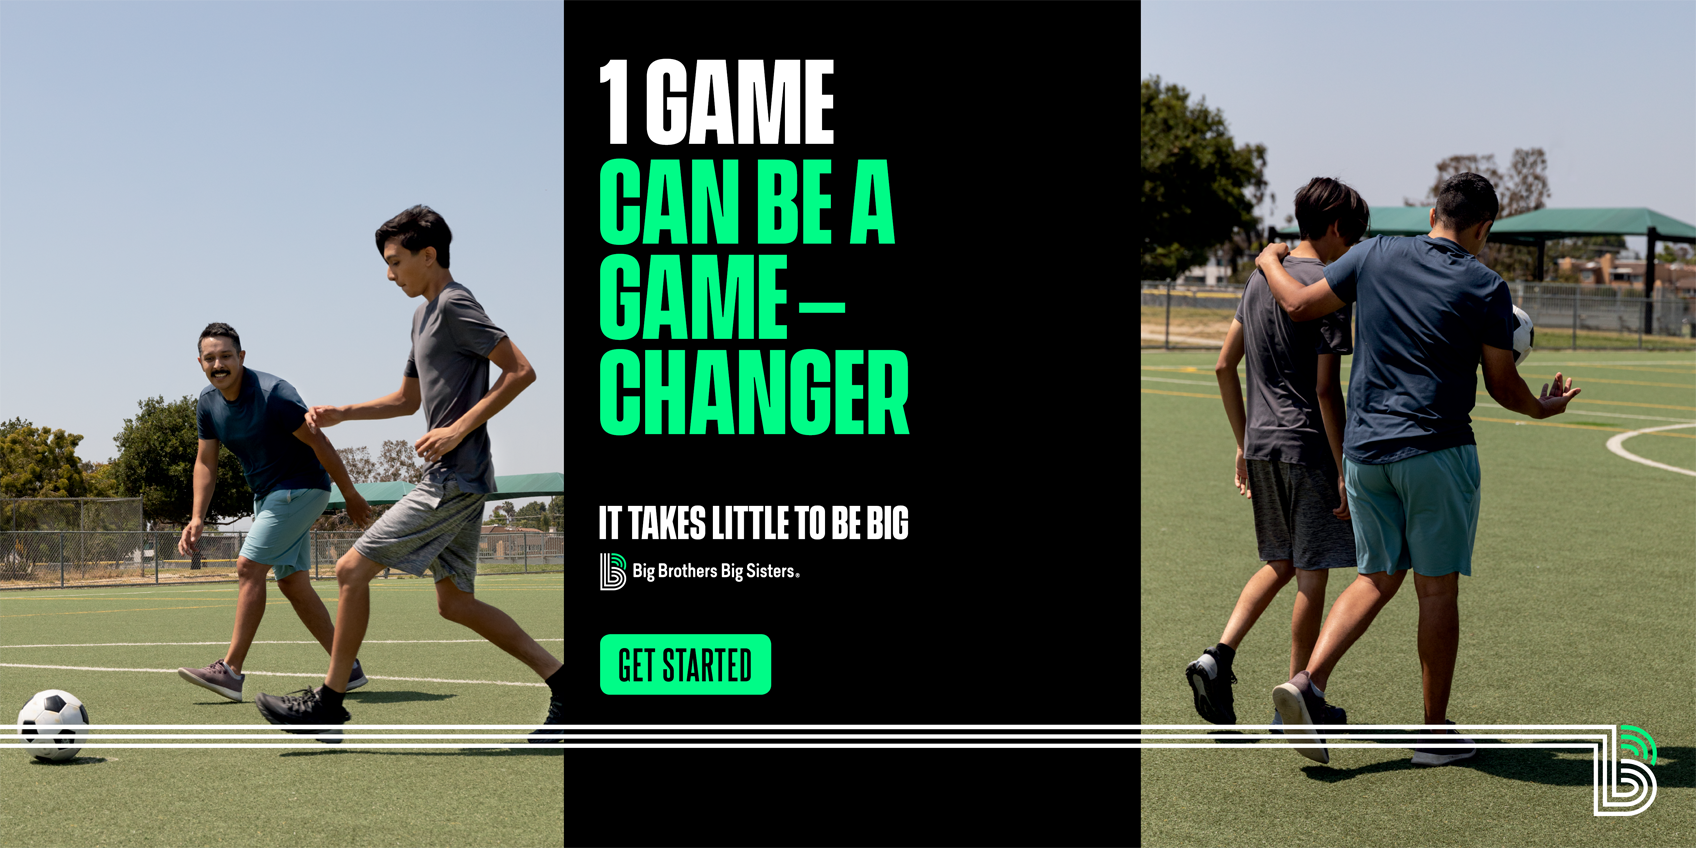 One game can be a game-changer - It takes a little  to be big. Get started.